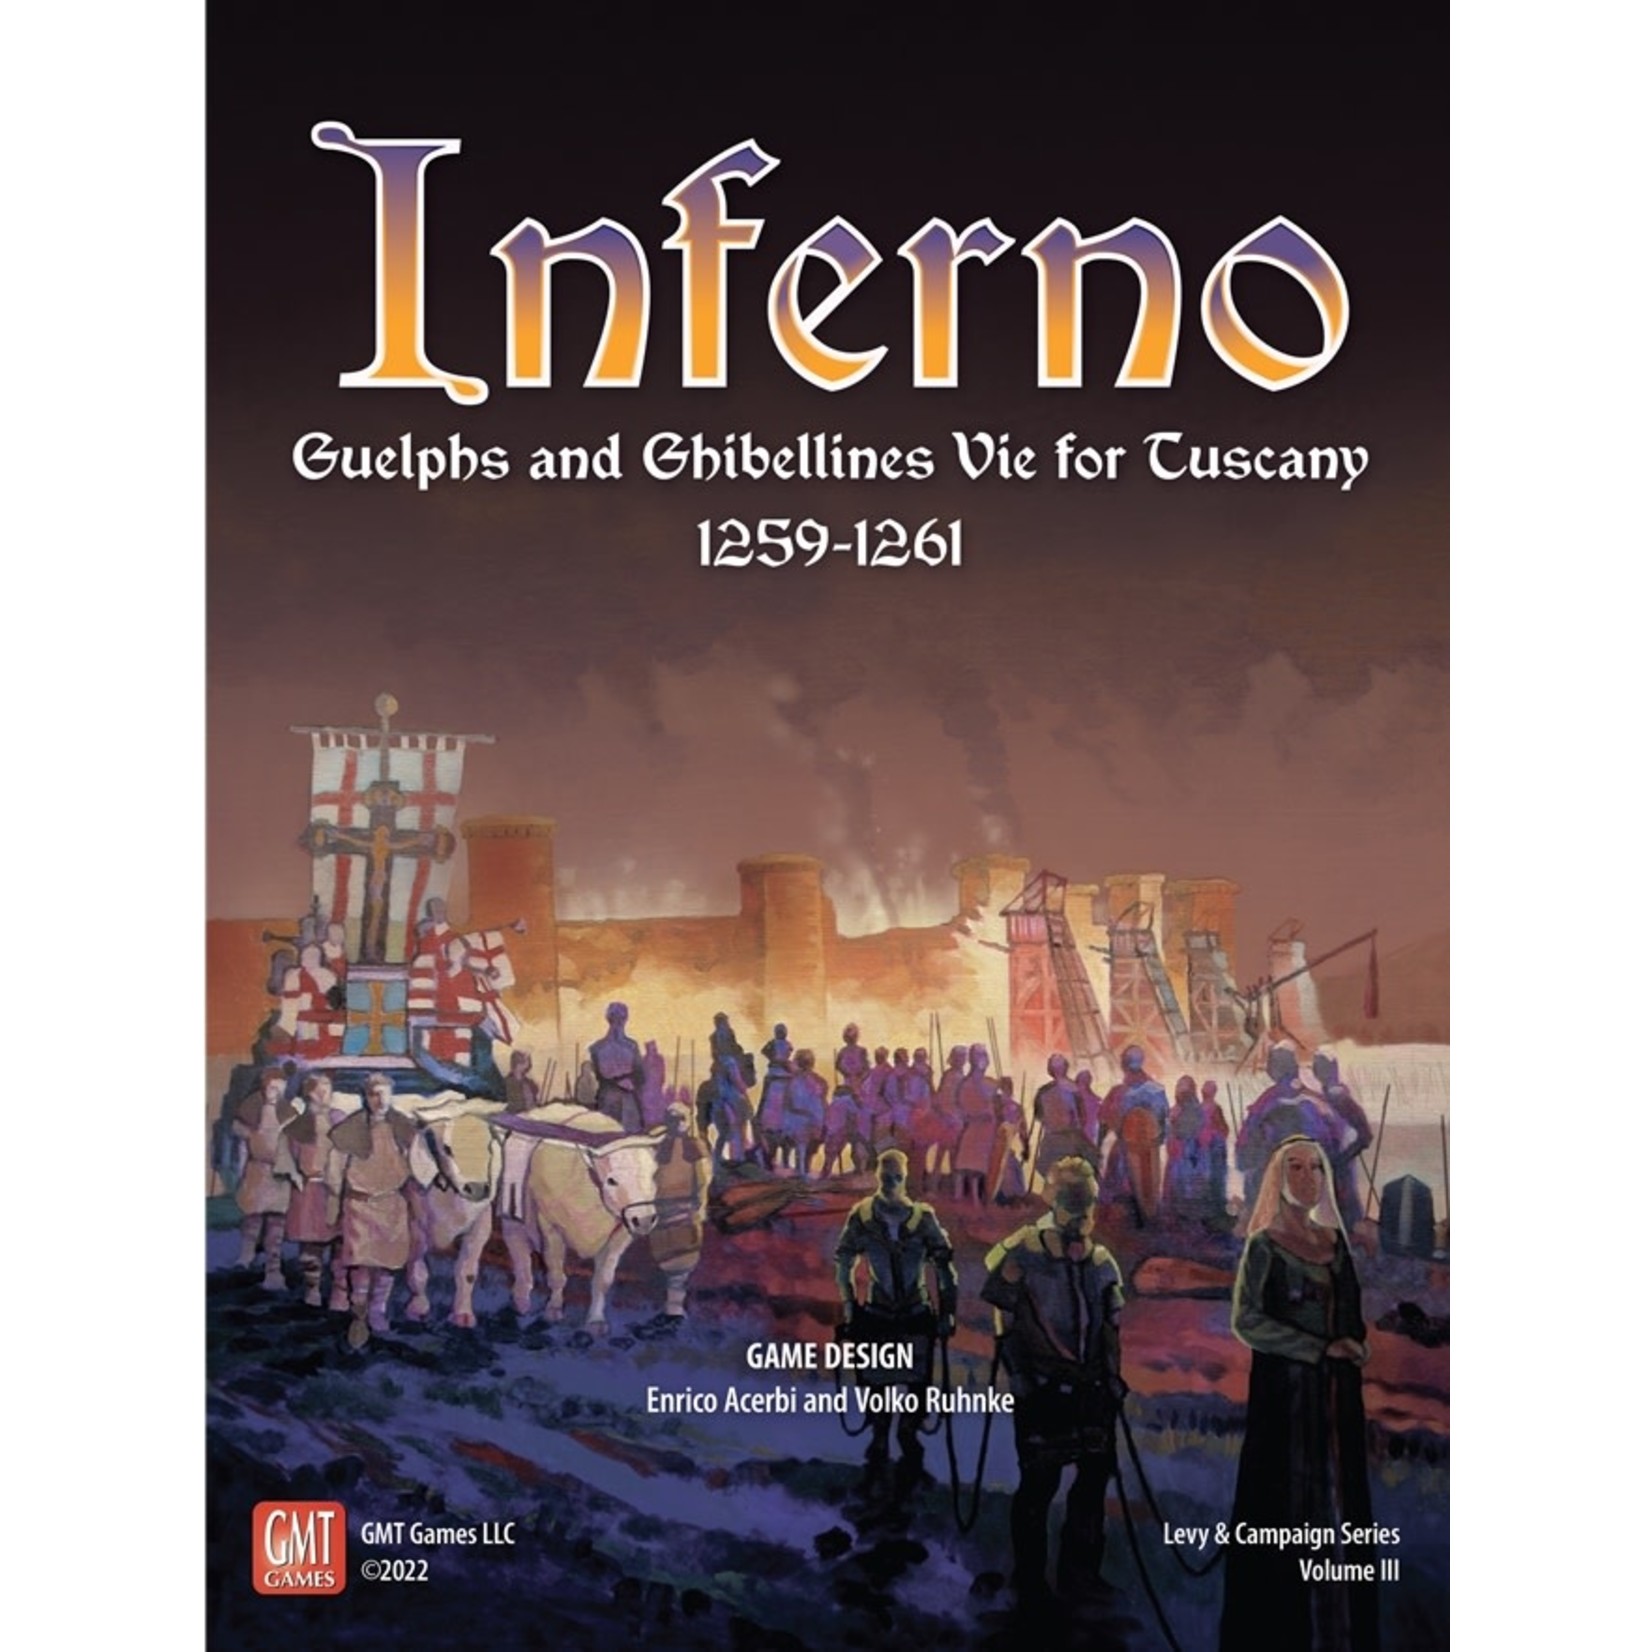 GMT Inferno: Guelphs and Ghibellines Vie for Tuscany, 1259-1261